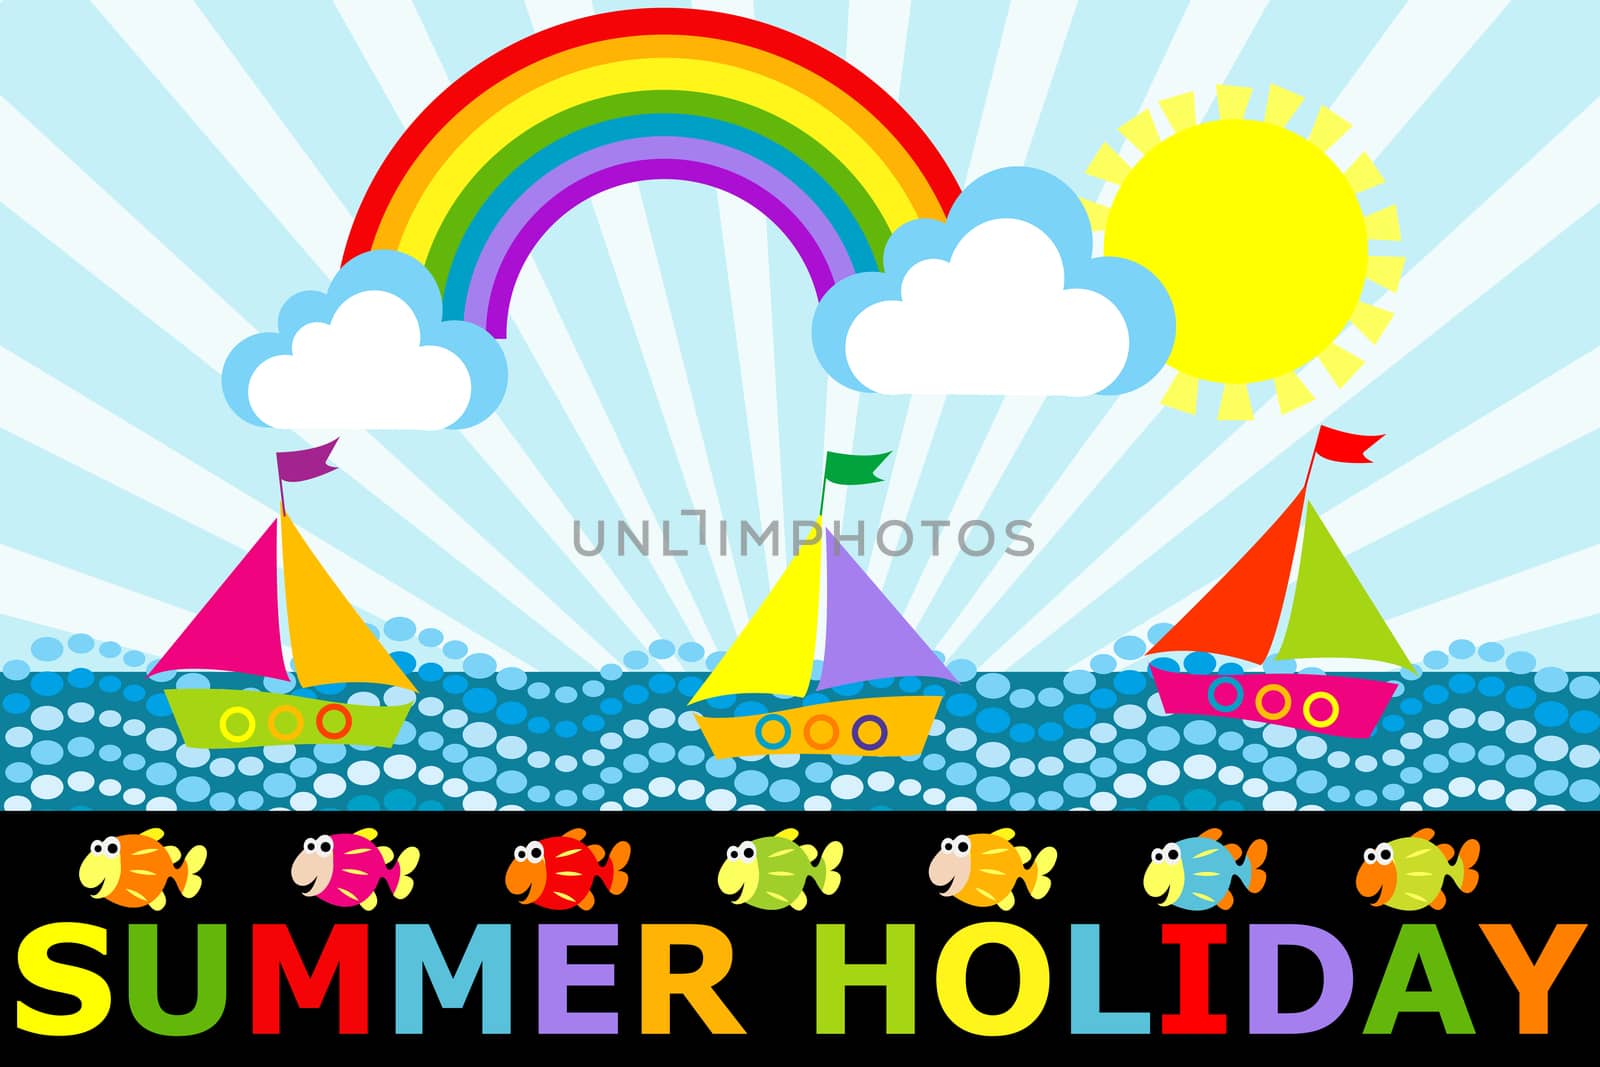 Fantasy cartoon seascape with boats and rainbow, summer holiday concept